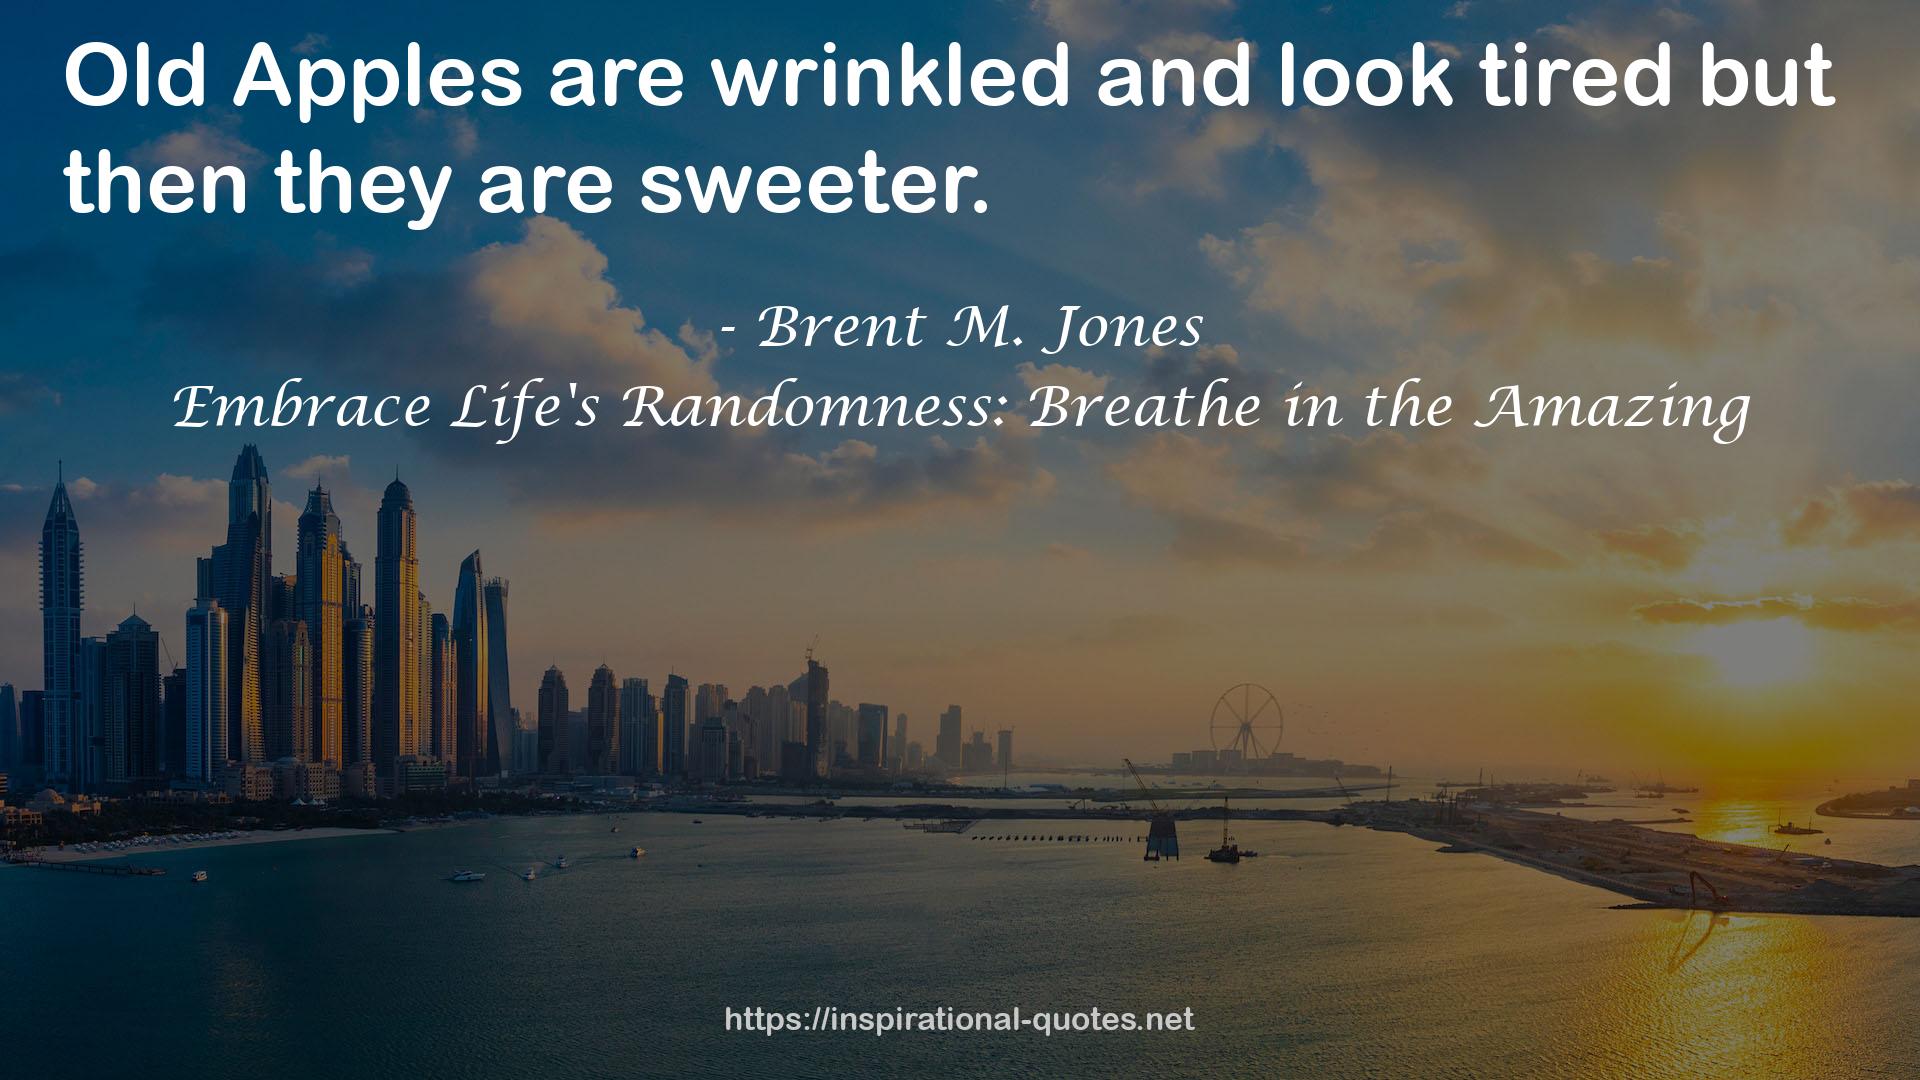 Embrace Life's Randomness: Breathe in the Amazing QUOTES